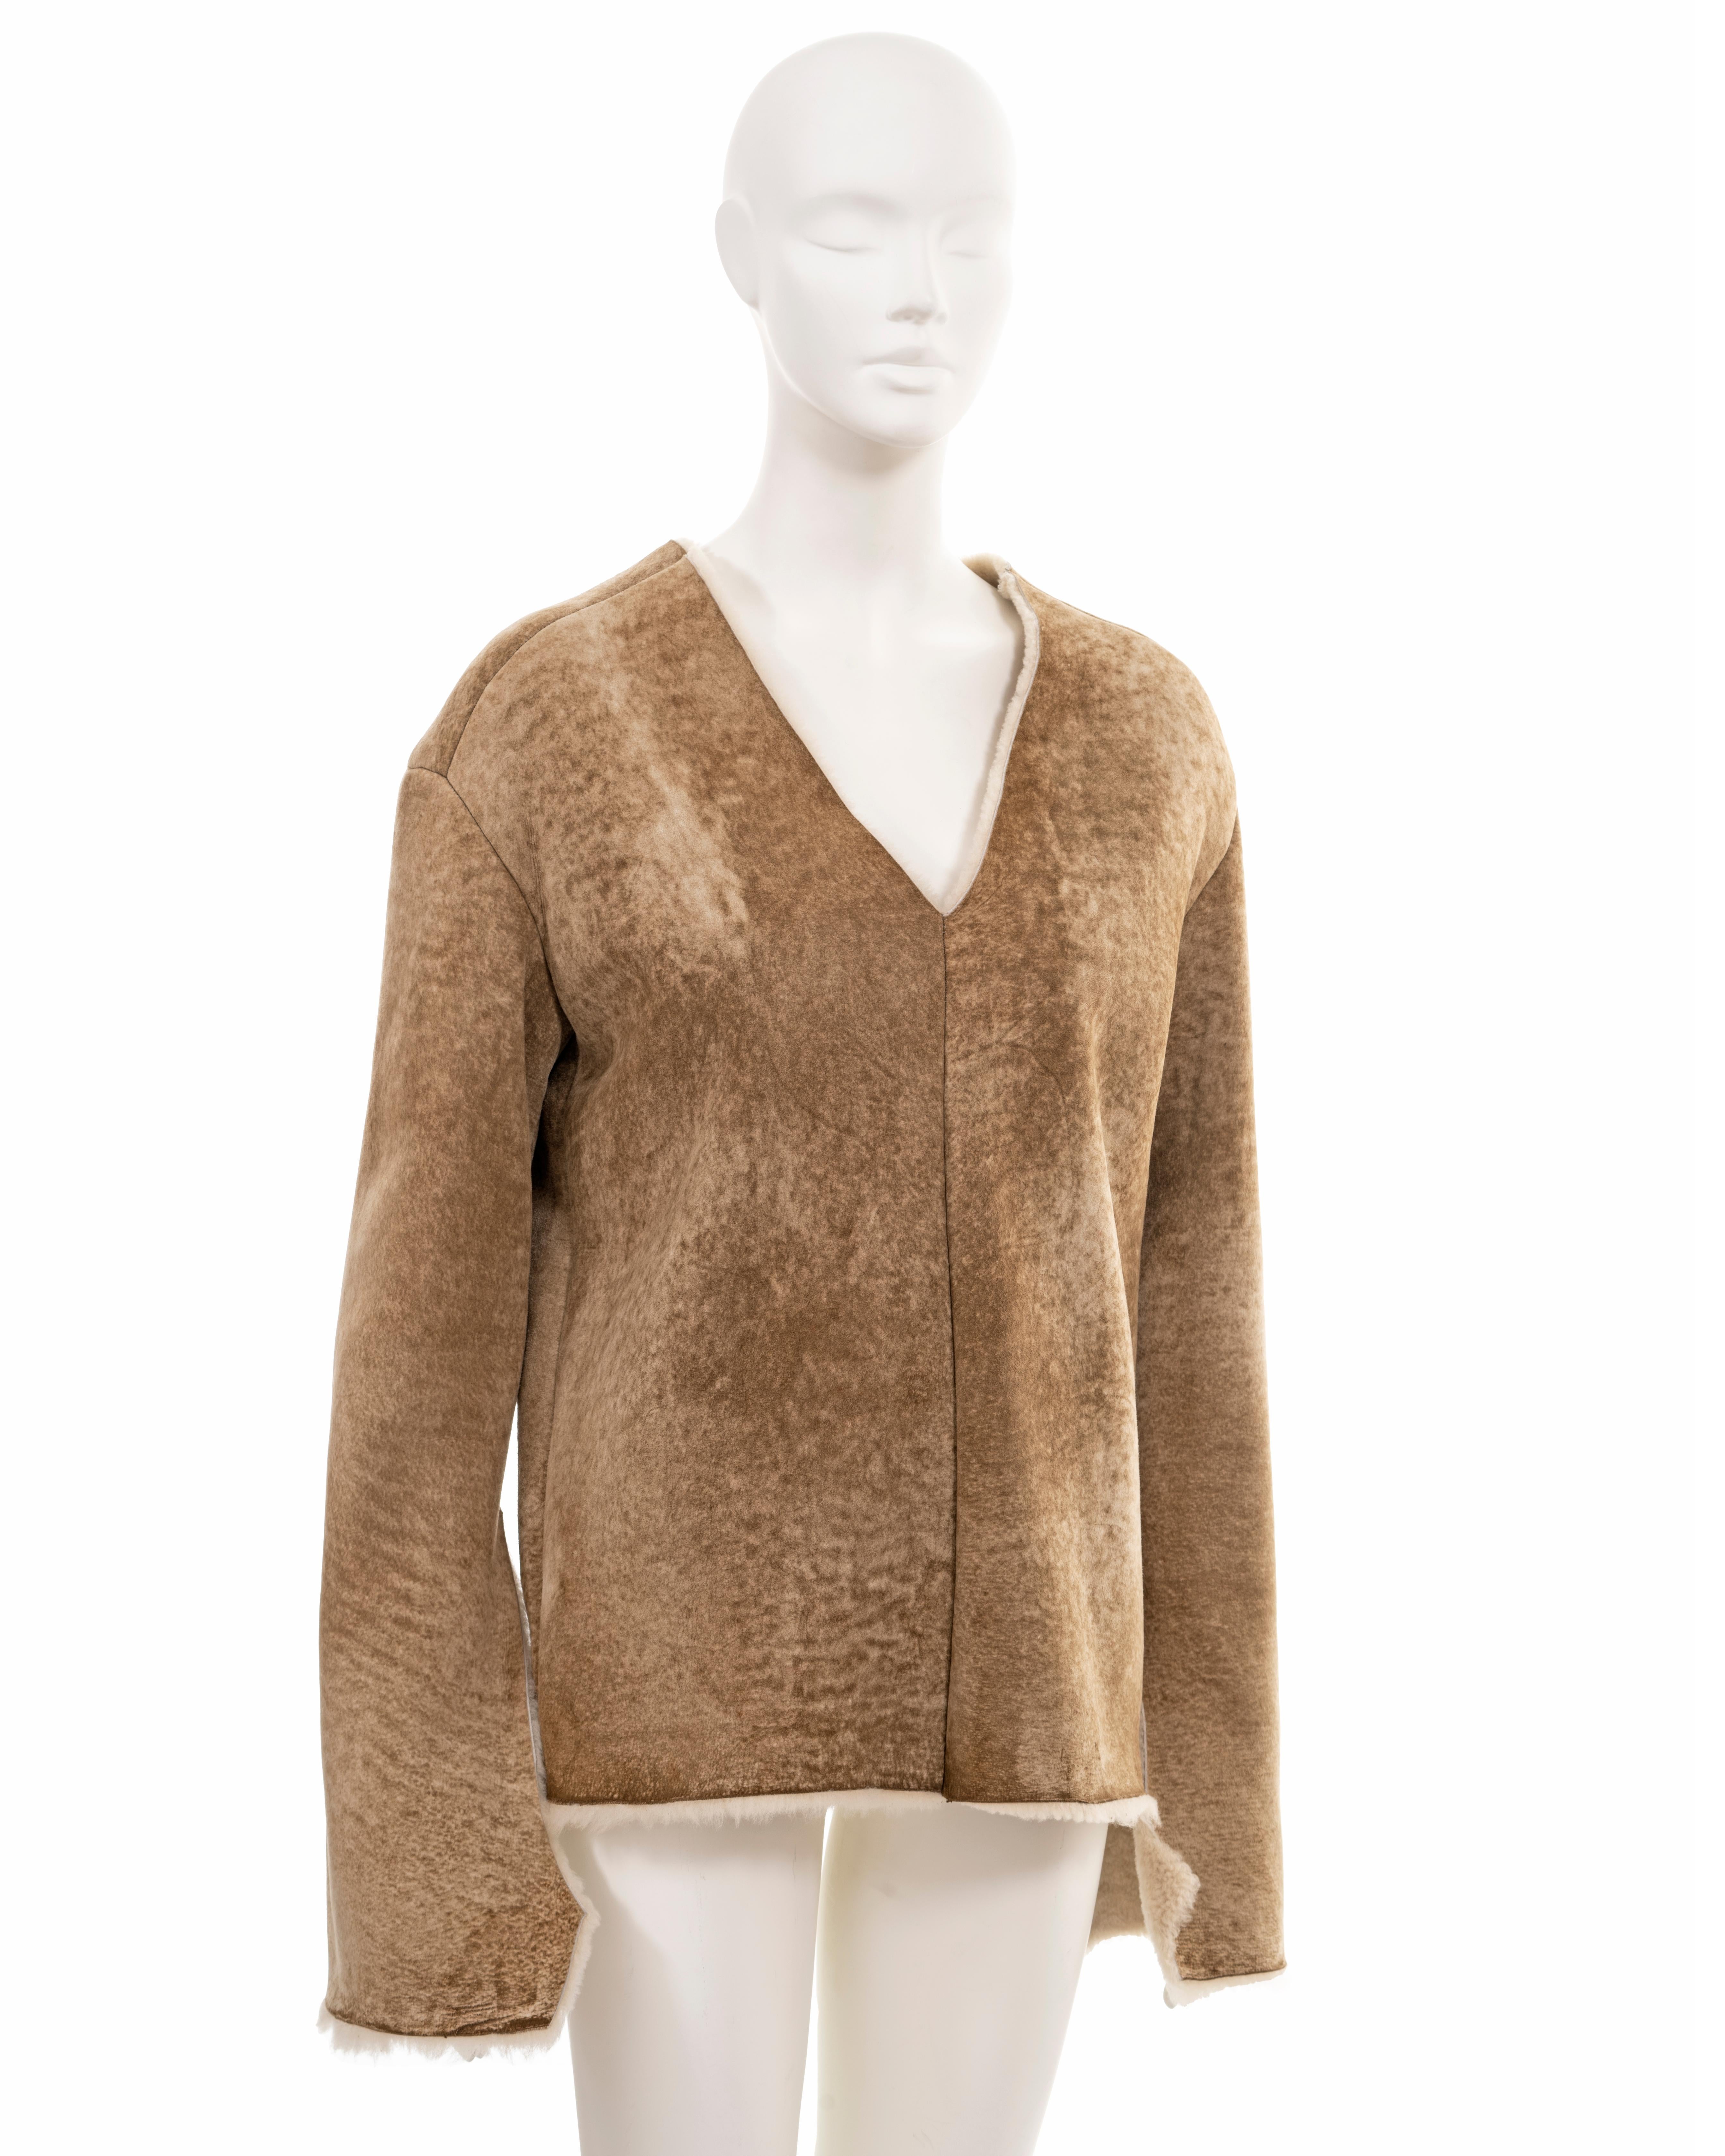 Ruffo Research by A.F. Vandevorst shearling pullover sweater, fw 2000 For Sale 6